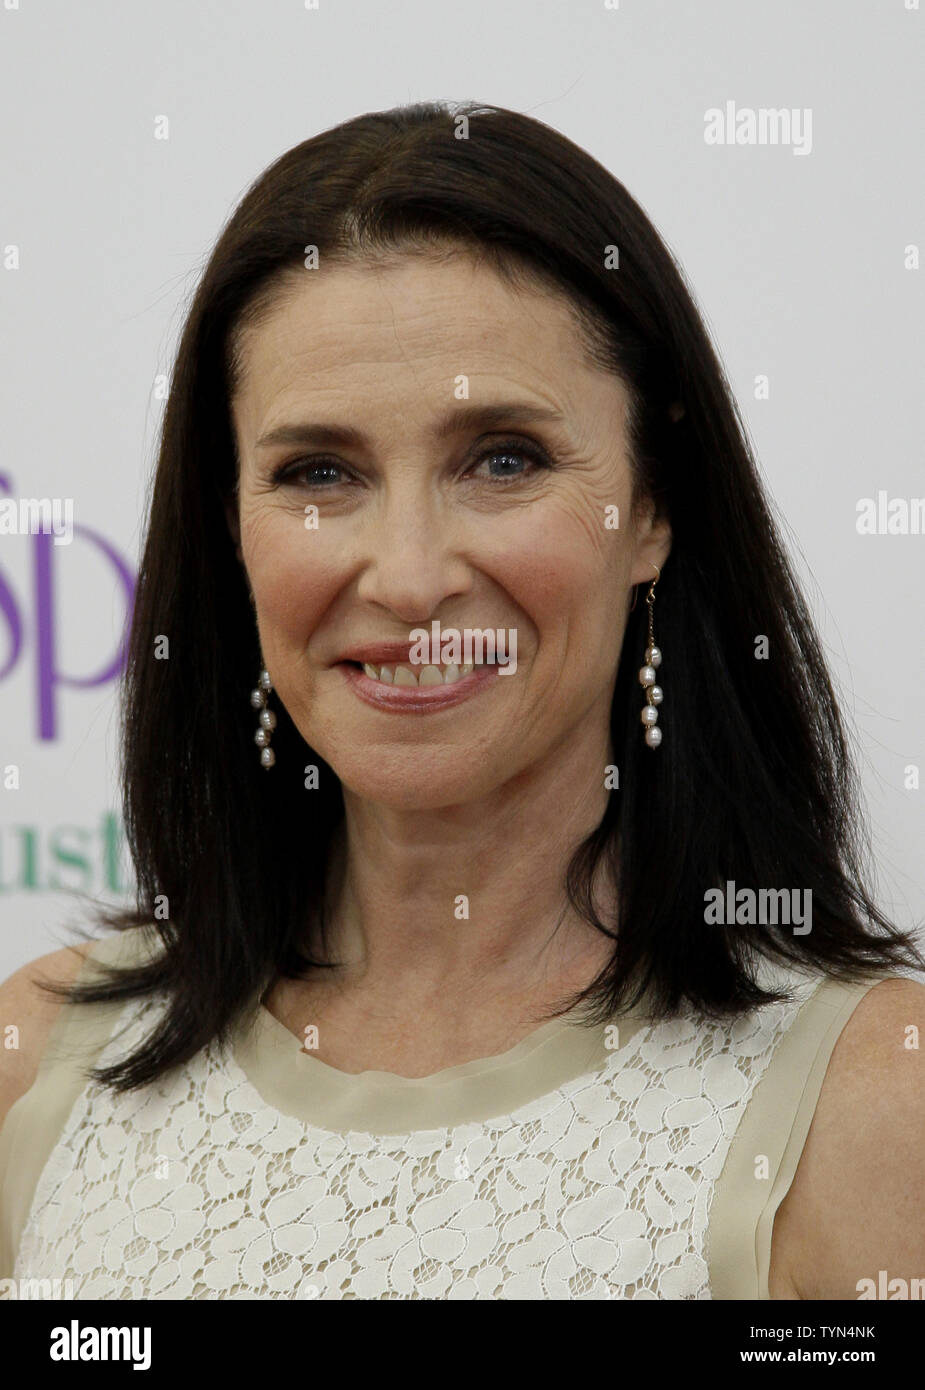 Mimi Rogers arrives on the red carpet at the world premiere of Columbia Pictures 'Hope Springs' at the SVA Theater in New York City on August 6, 2012.       UPI/John Angelillo Stock Photo